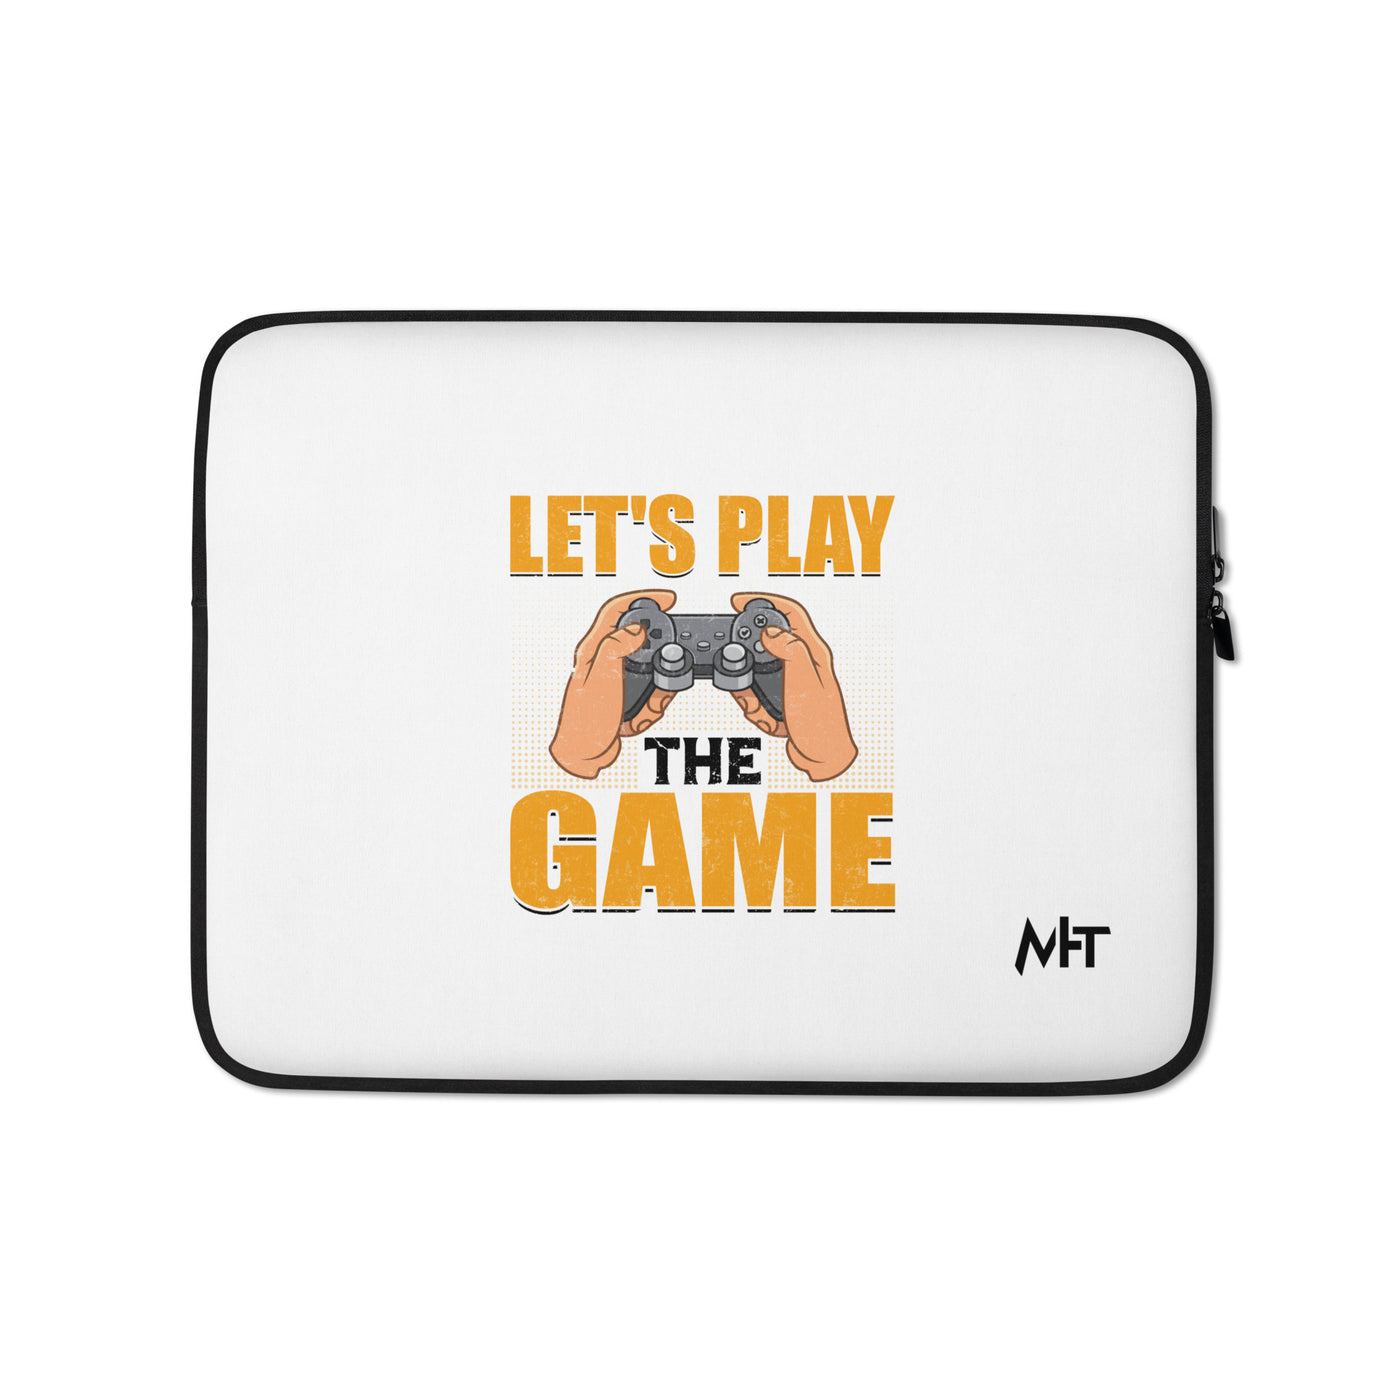 Let's Play the Game in Dark Text - Laptop Sleeve